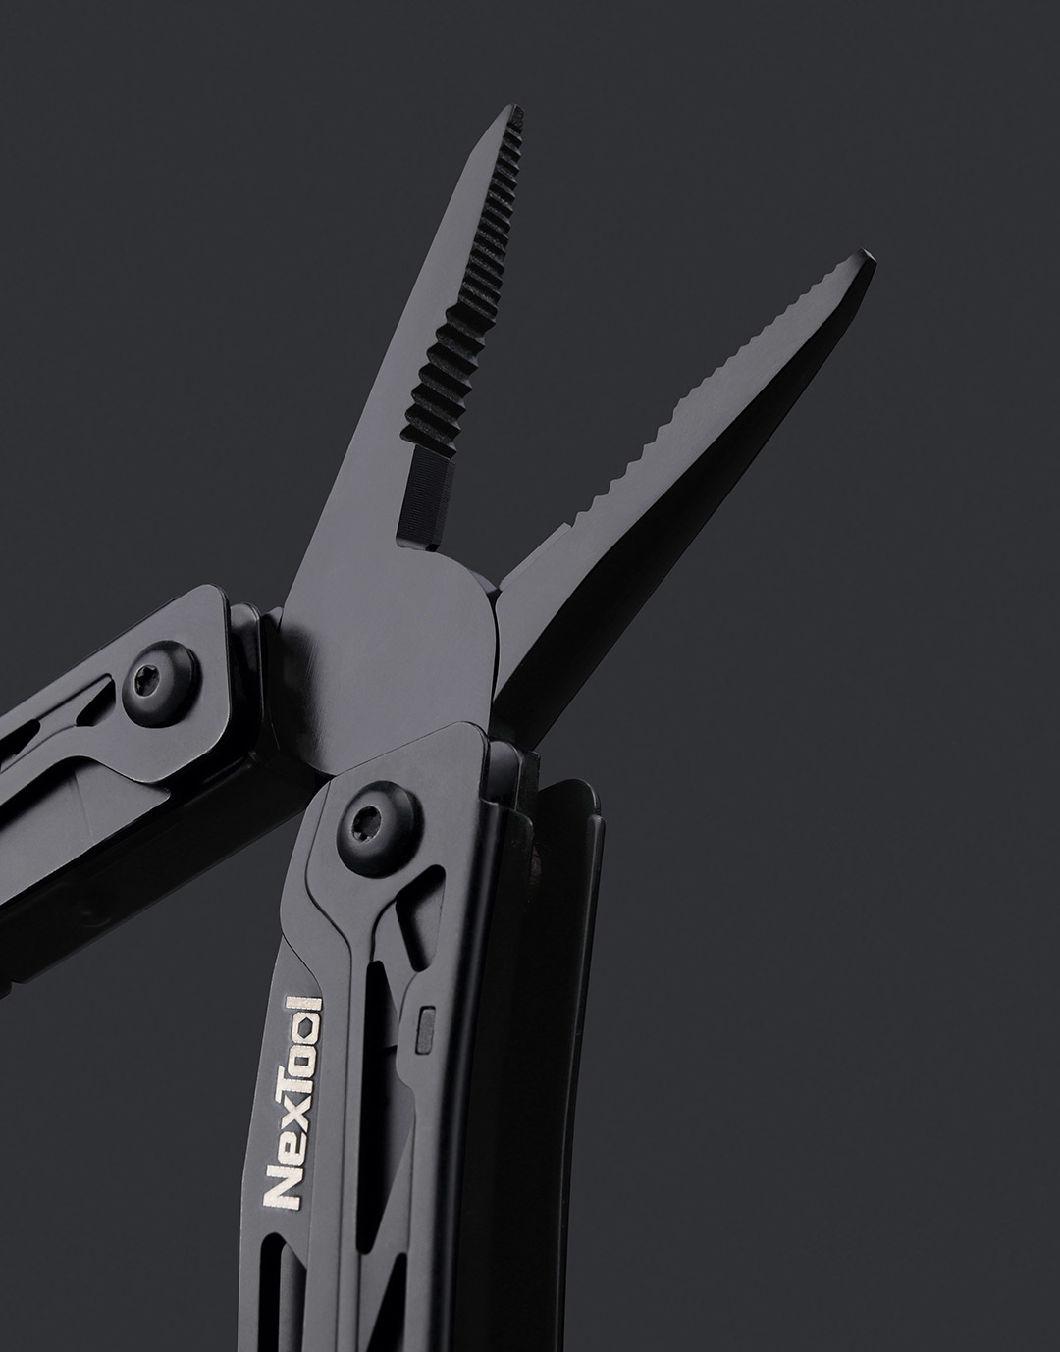 Nextool New Design Outdoor Portable Pliers Multitool with Bottle Opener